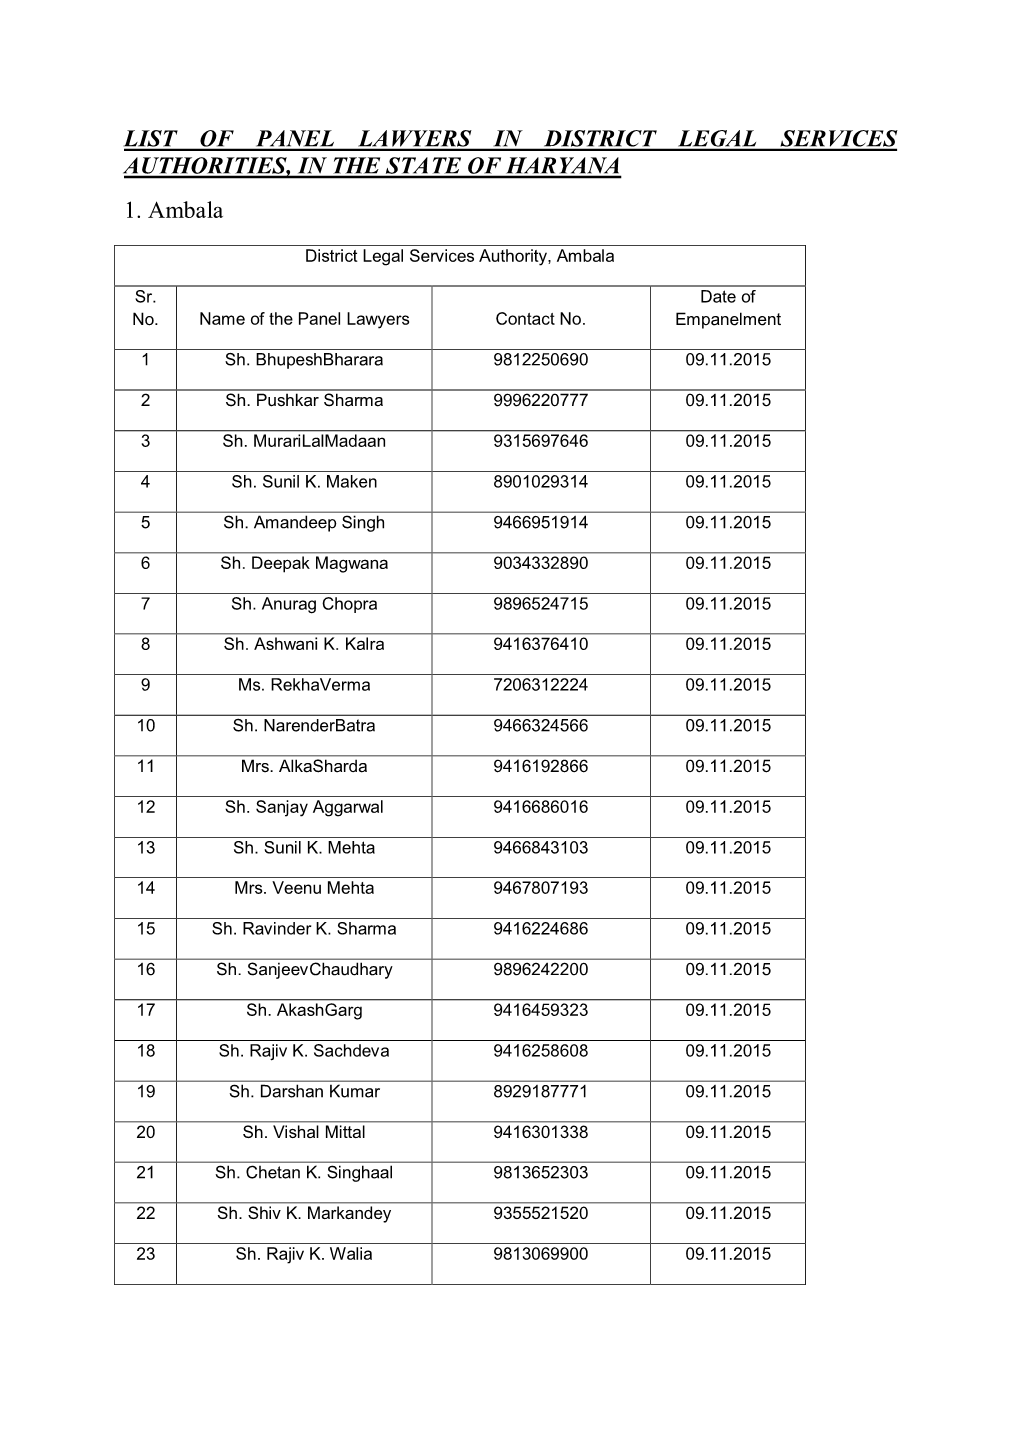 List of Panel Lawyers in District Legal Services Authorities, in the State of Haryana 1